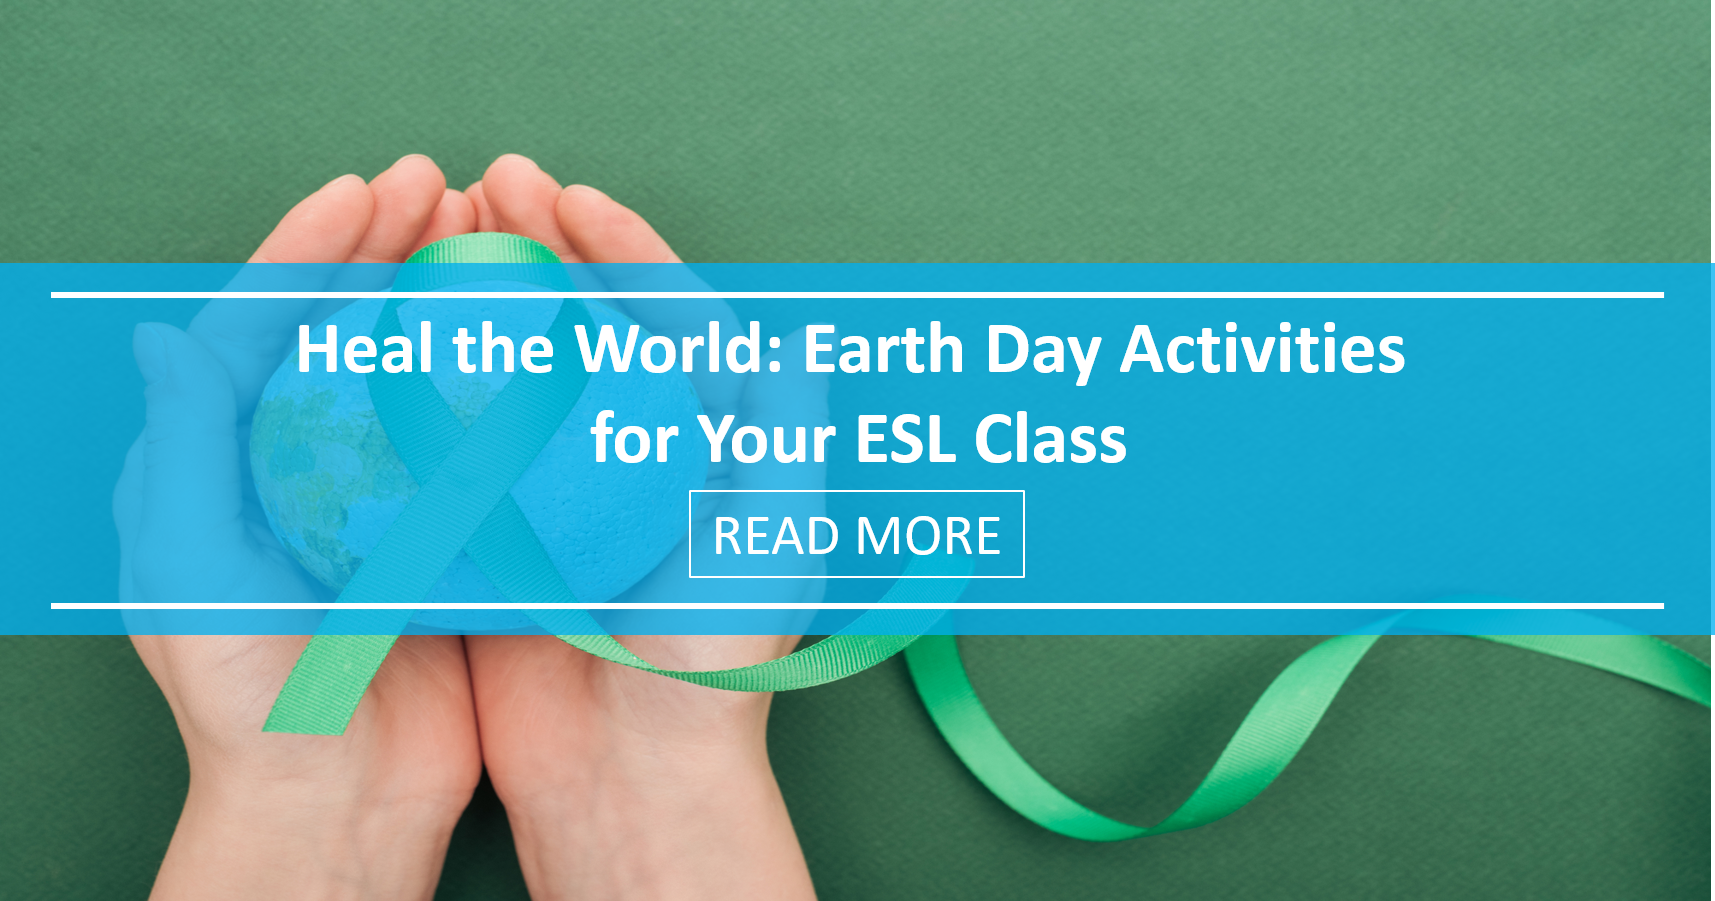 Heal the World: Earth Day Activities for Your ESL Class